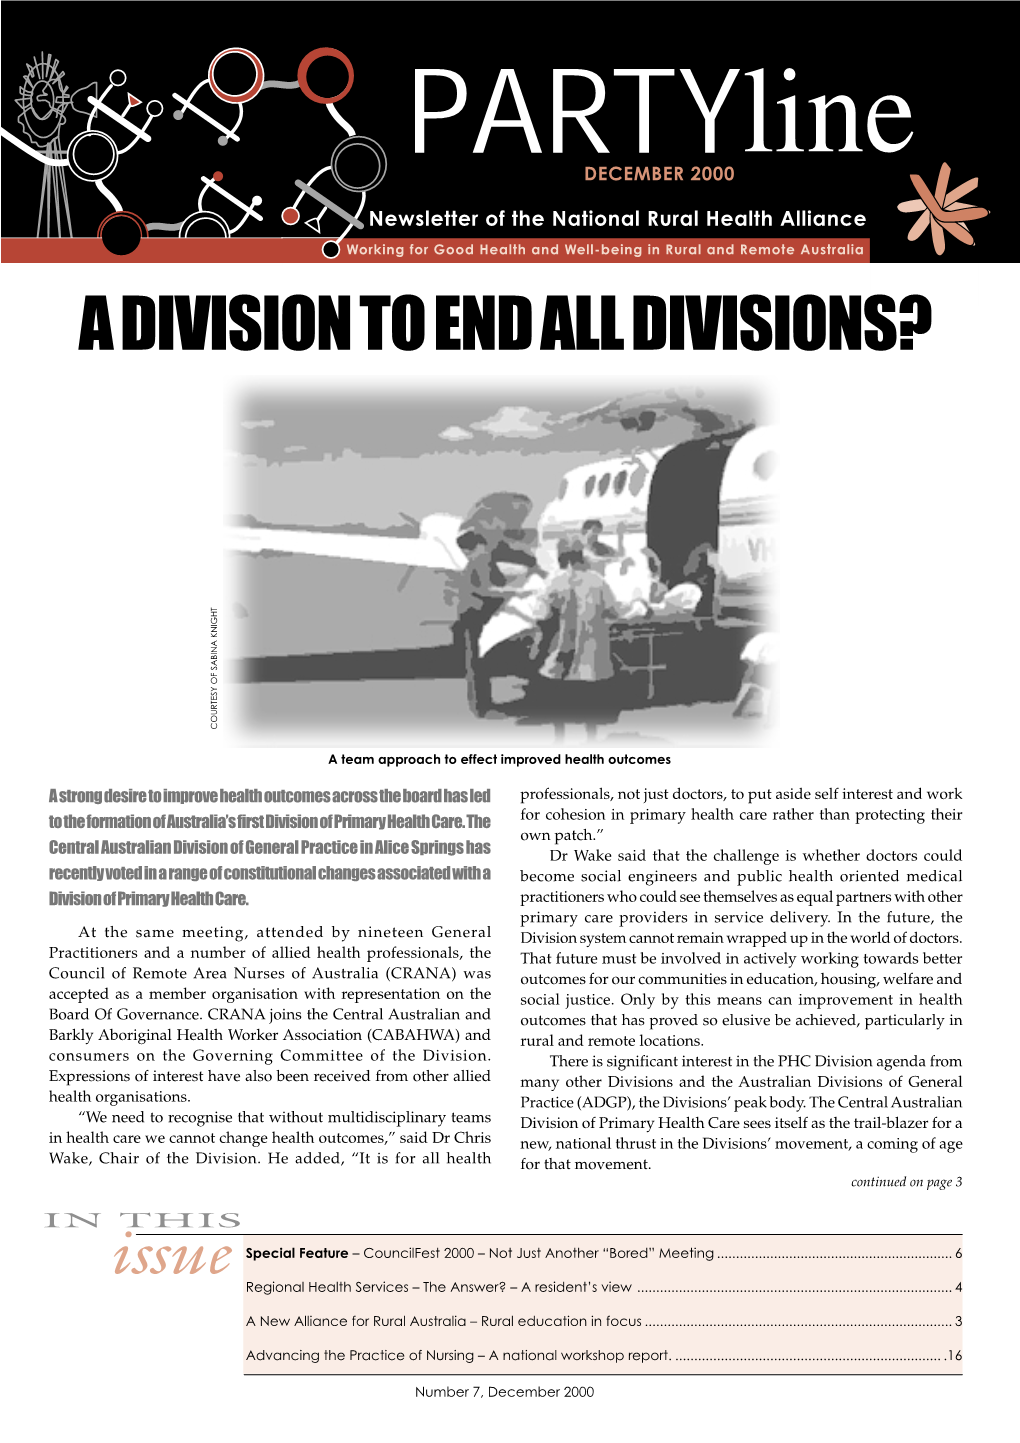 A Division to End All Divisions?